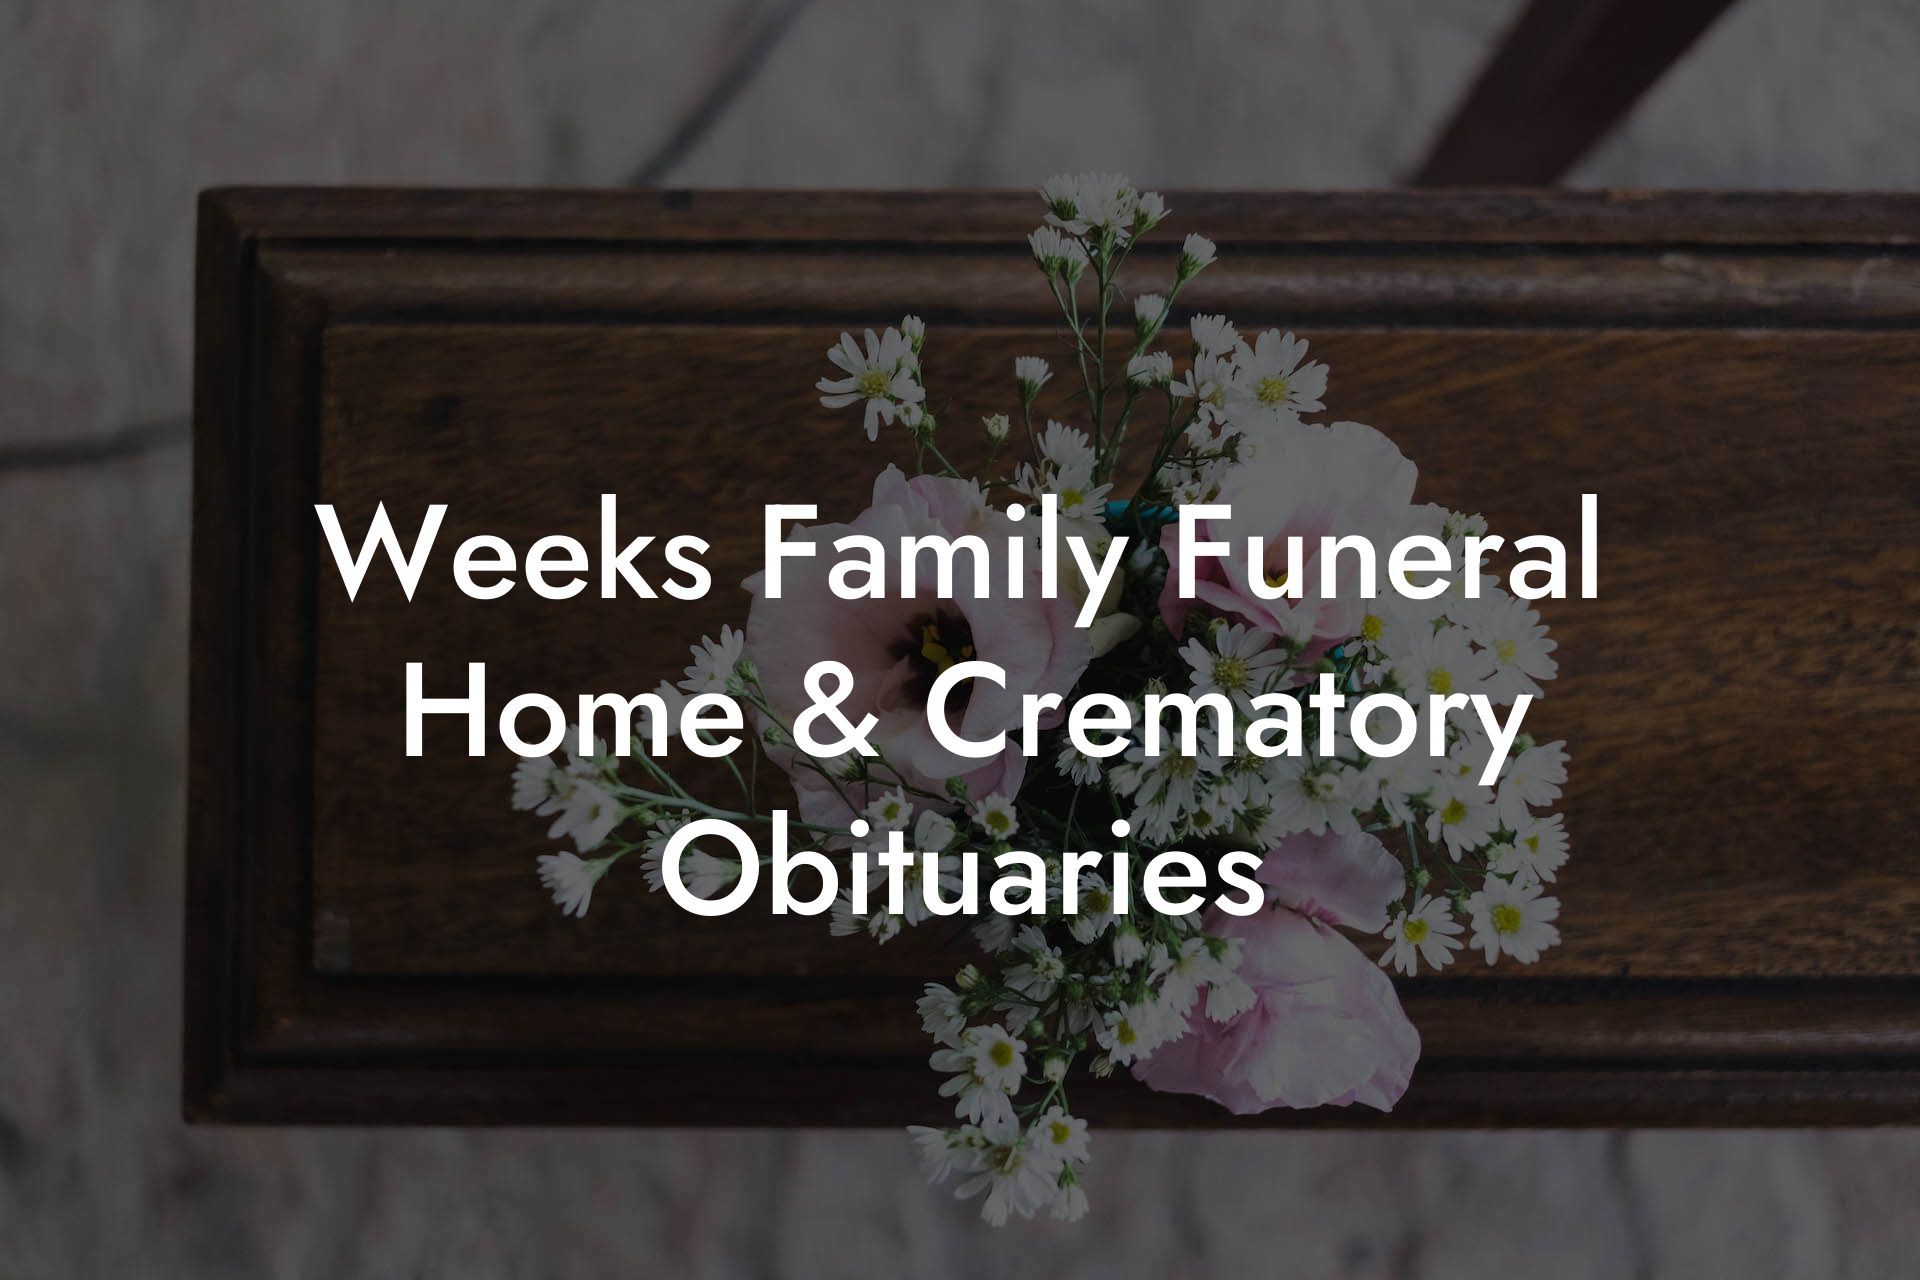 Weeks Family Funeral Home & Crematory Obituaries